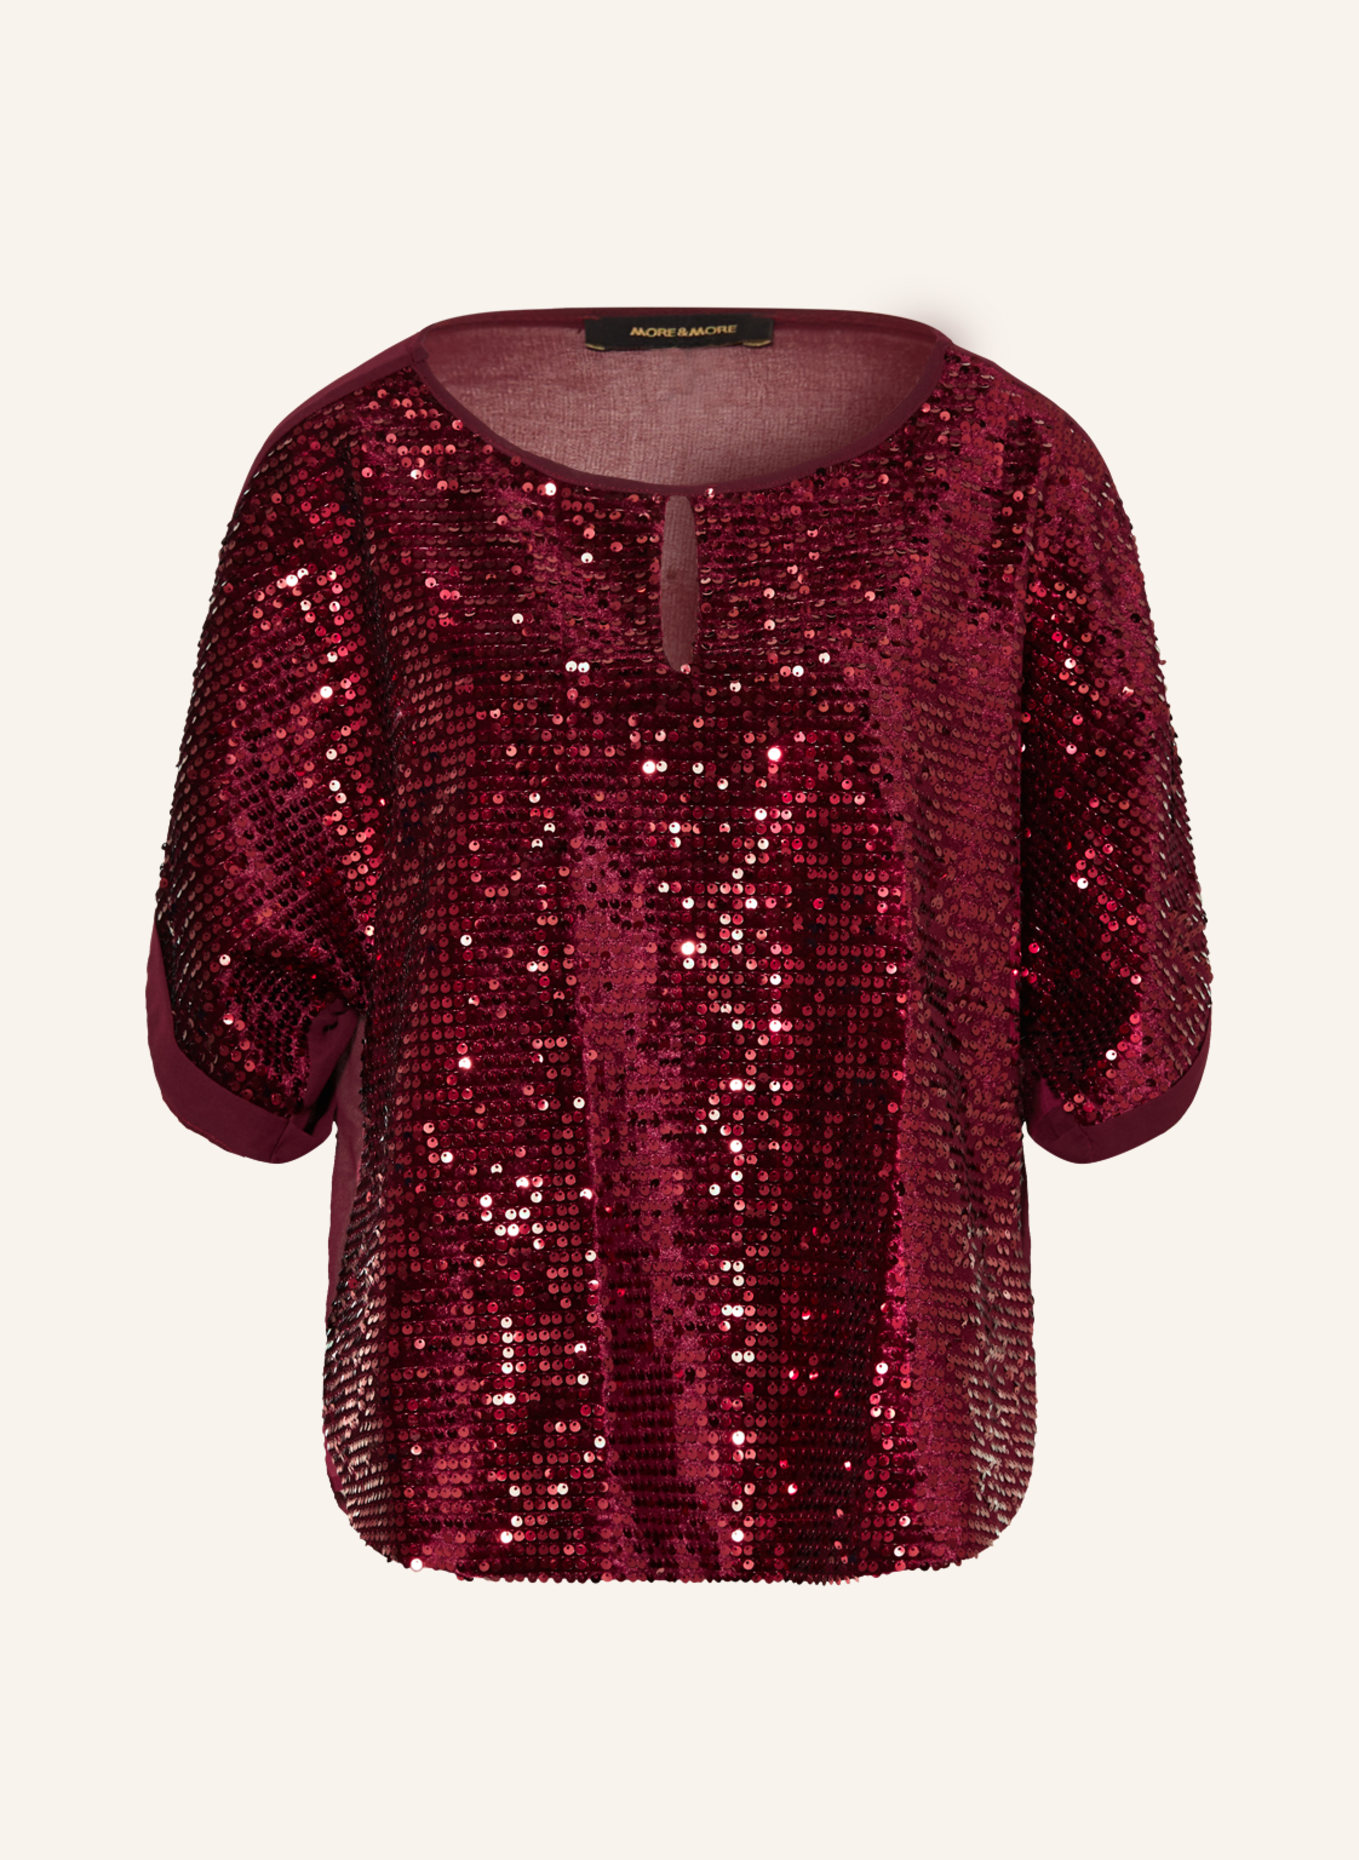 MORE & MORE Shirt blouse with sequins, Color: DARK RED (Image 1)